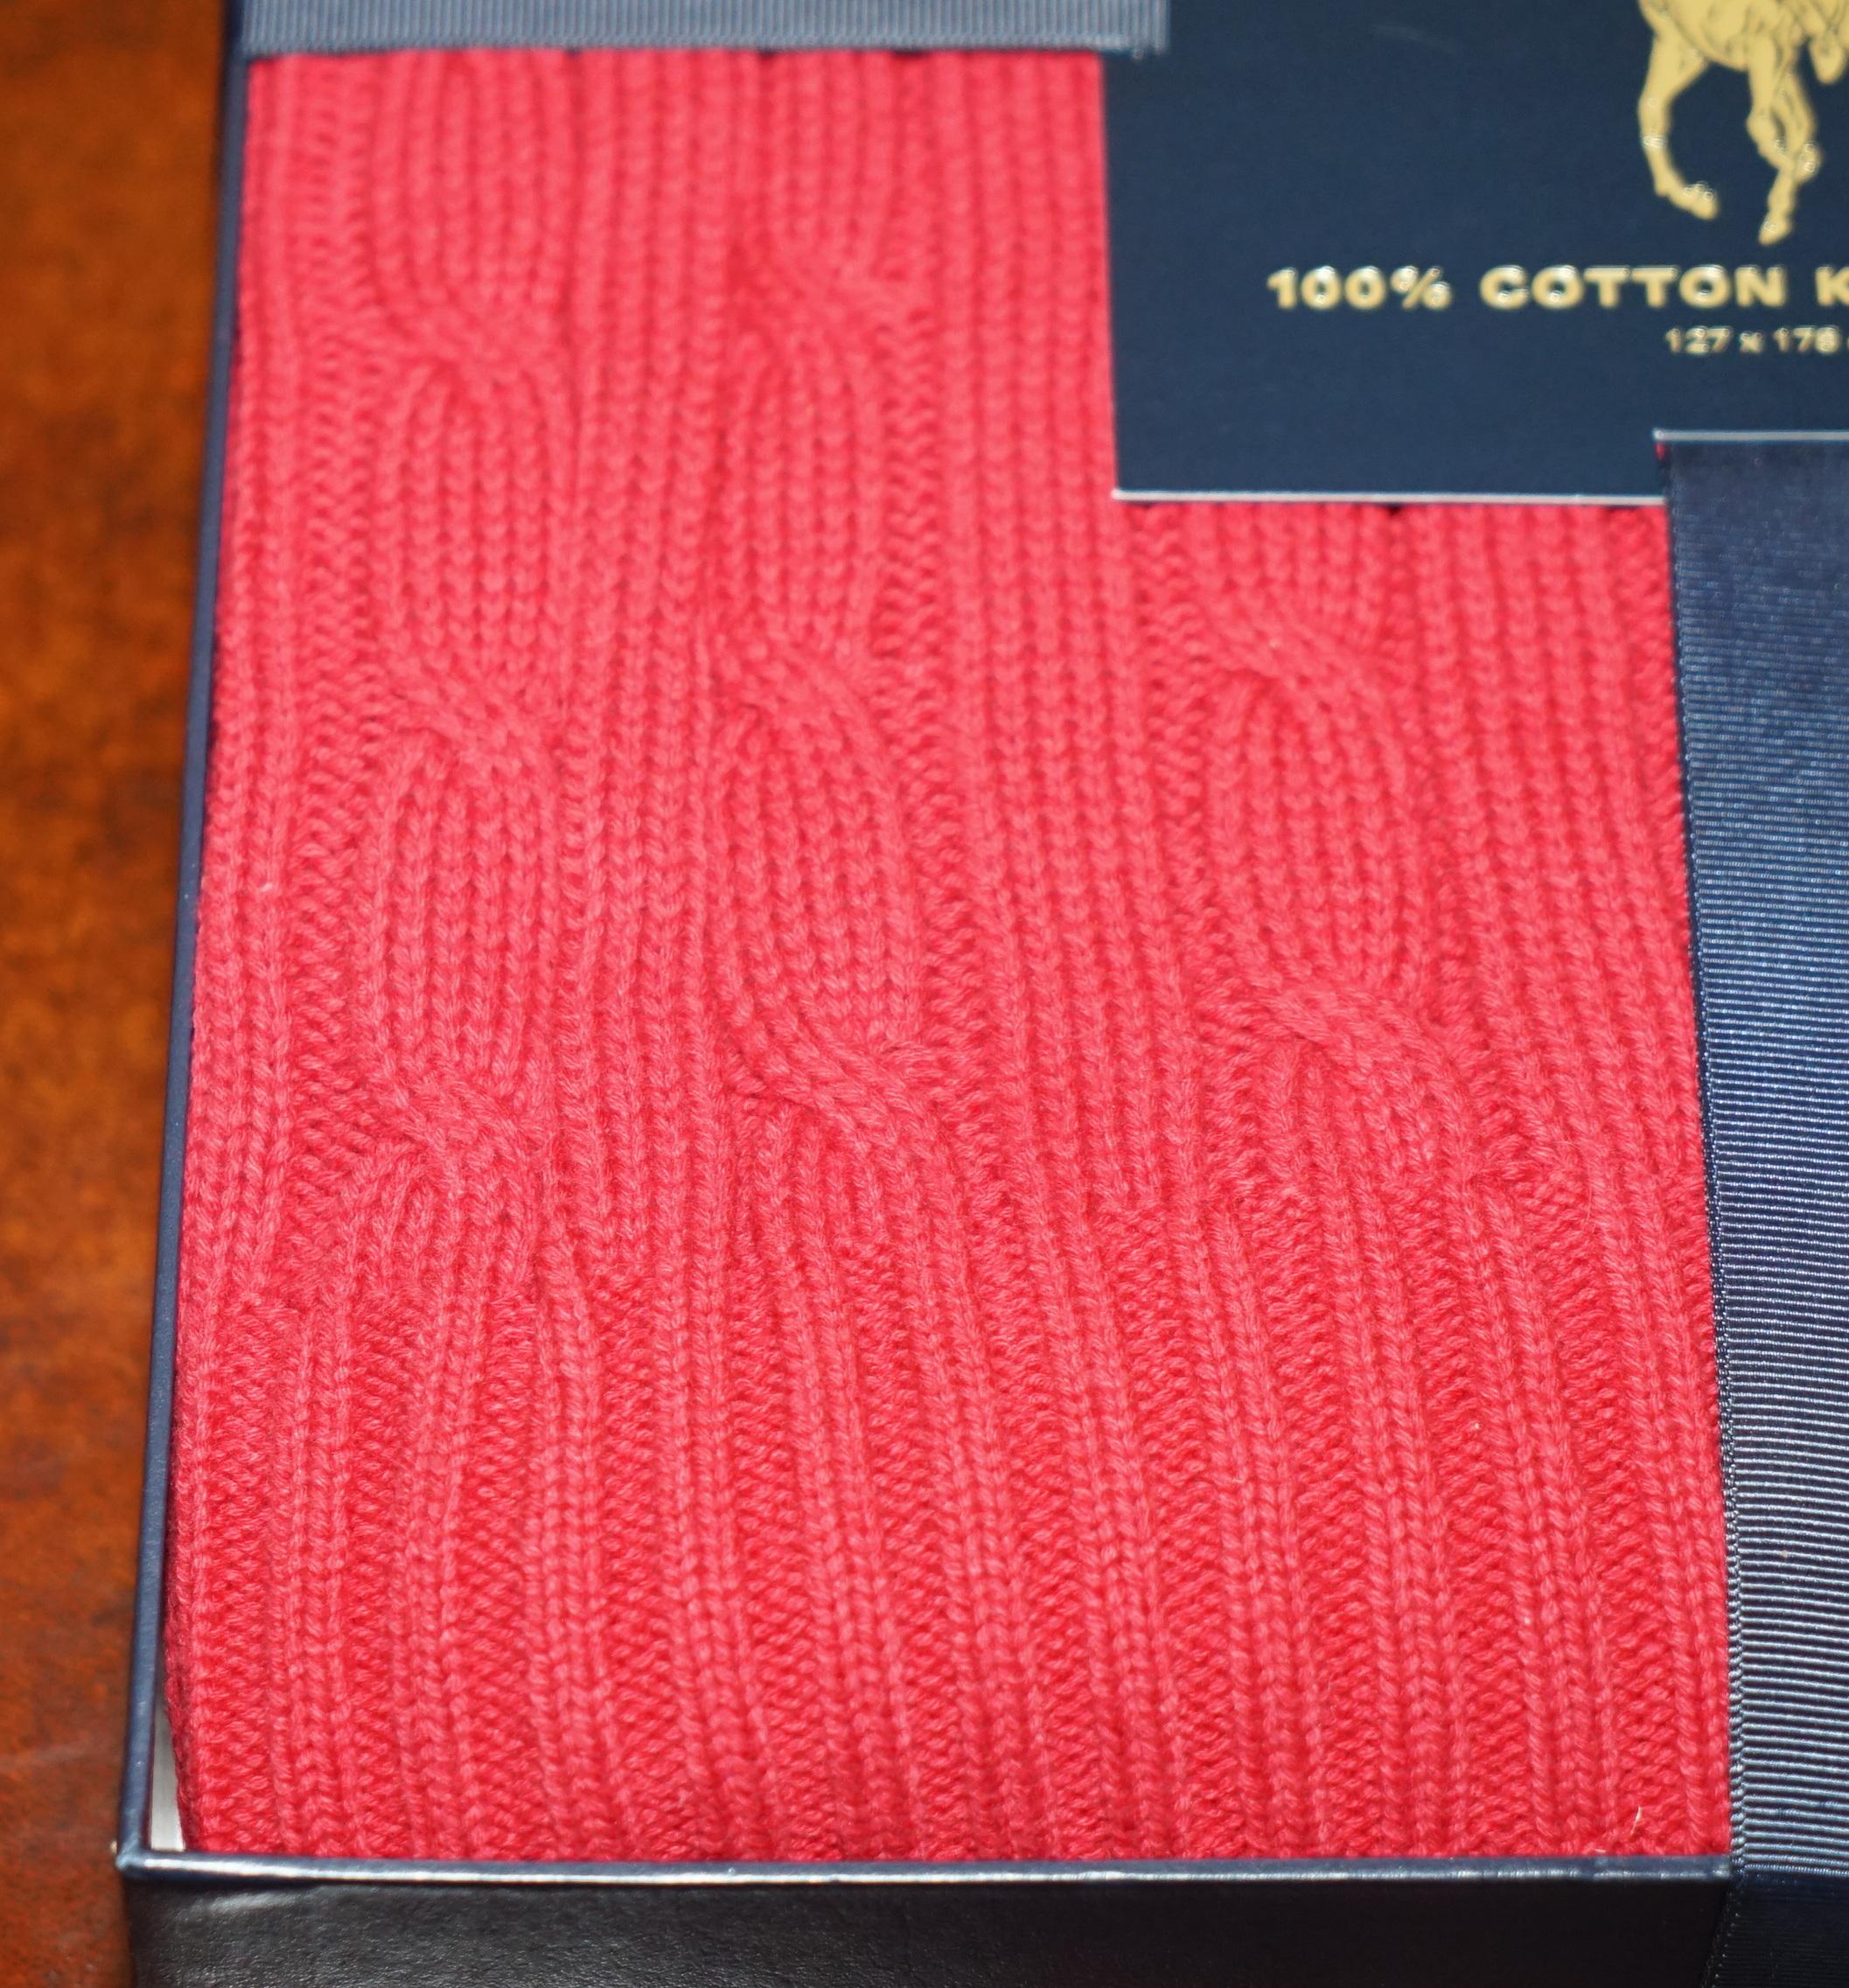 Contemporary  BRAND NEW AND BOXED RALPH LAUREN KNiTTED COTTON CABLE THROW BLANKET